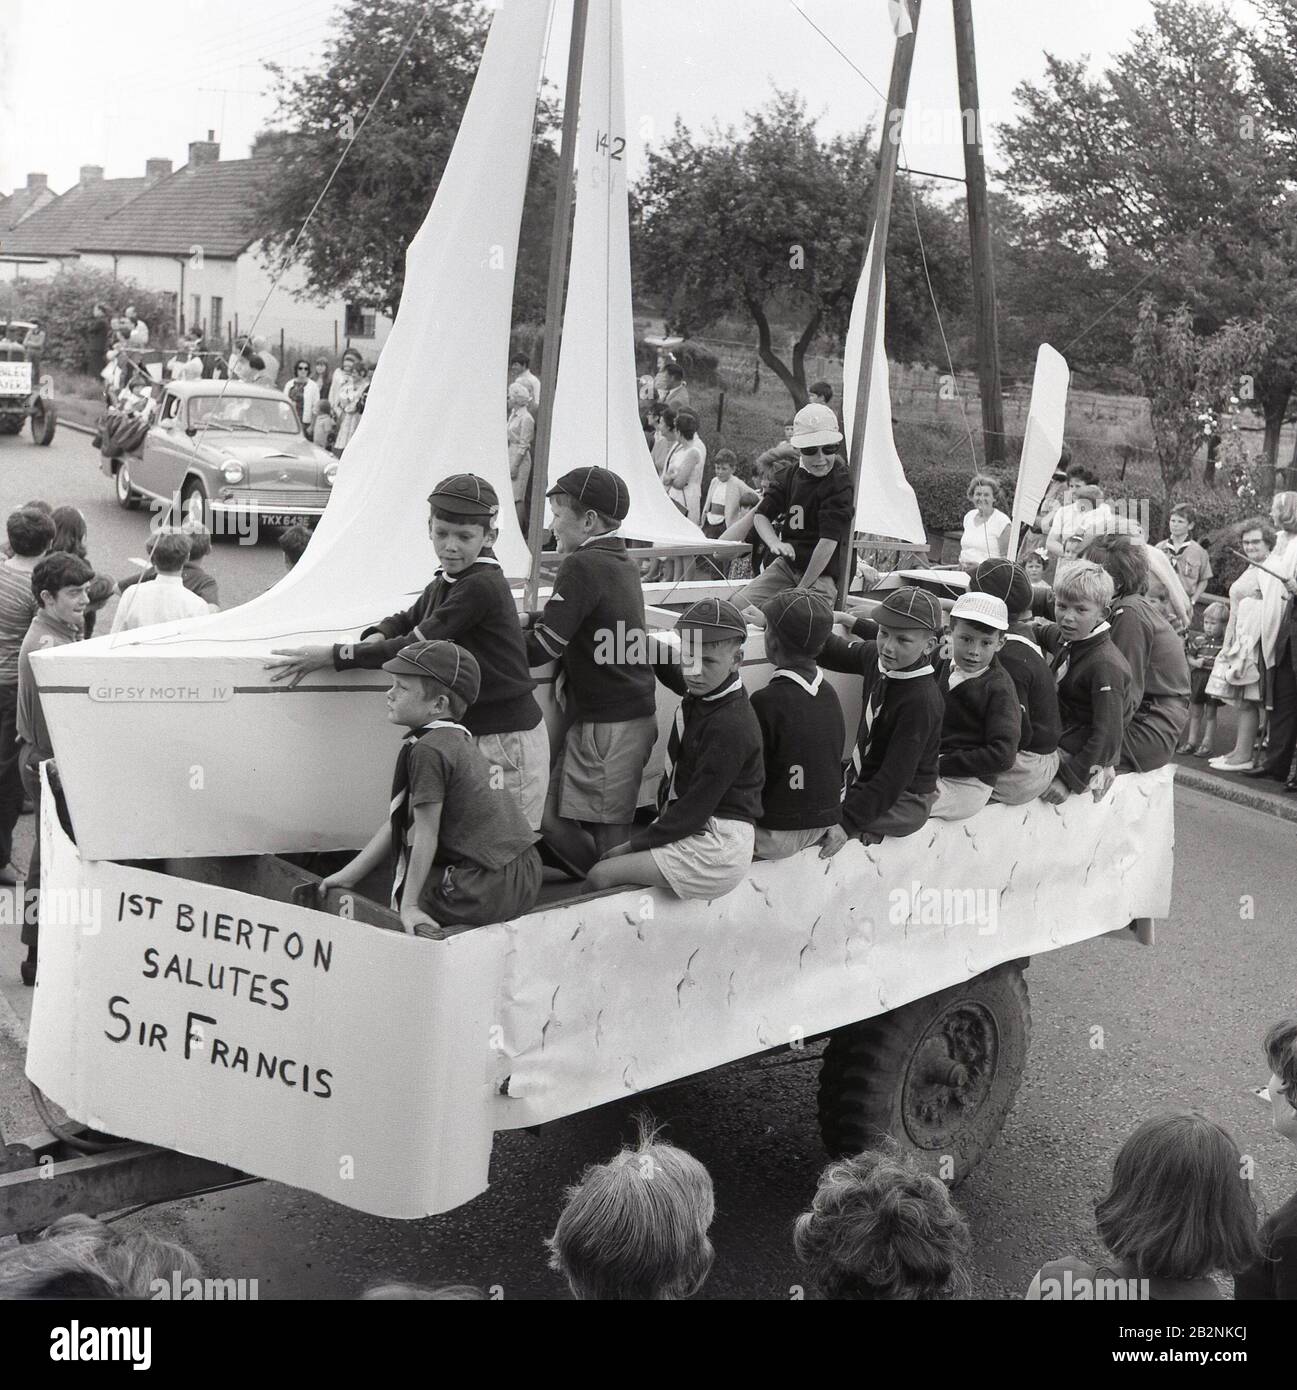 1960s, historical, Cub scouts on a float in a carnival dressed as the boat, 'Gipsy Moth IV', to celebrate the achievements of 'Round-the-World' sailor Sir Francis Chichester, Bierton, Buckinghamshire, England, UK. Chichester became the first person to sail single-handed around the world by the clipper route in nined month and one day in 1966-67. Stock Photo